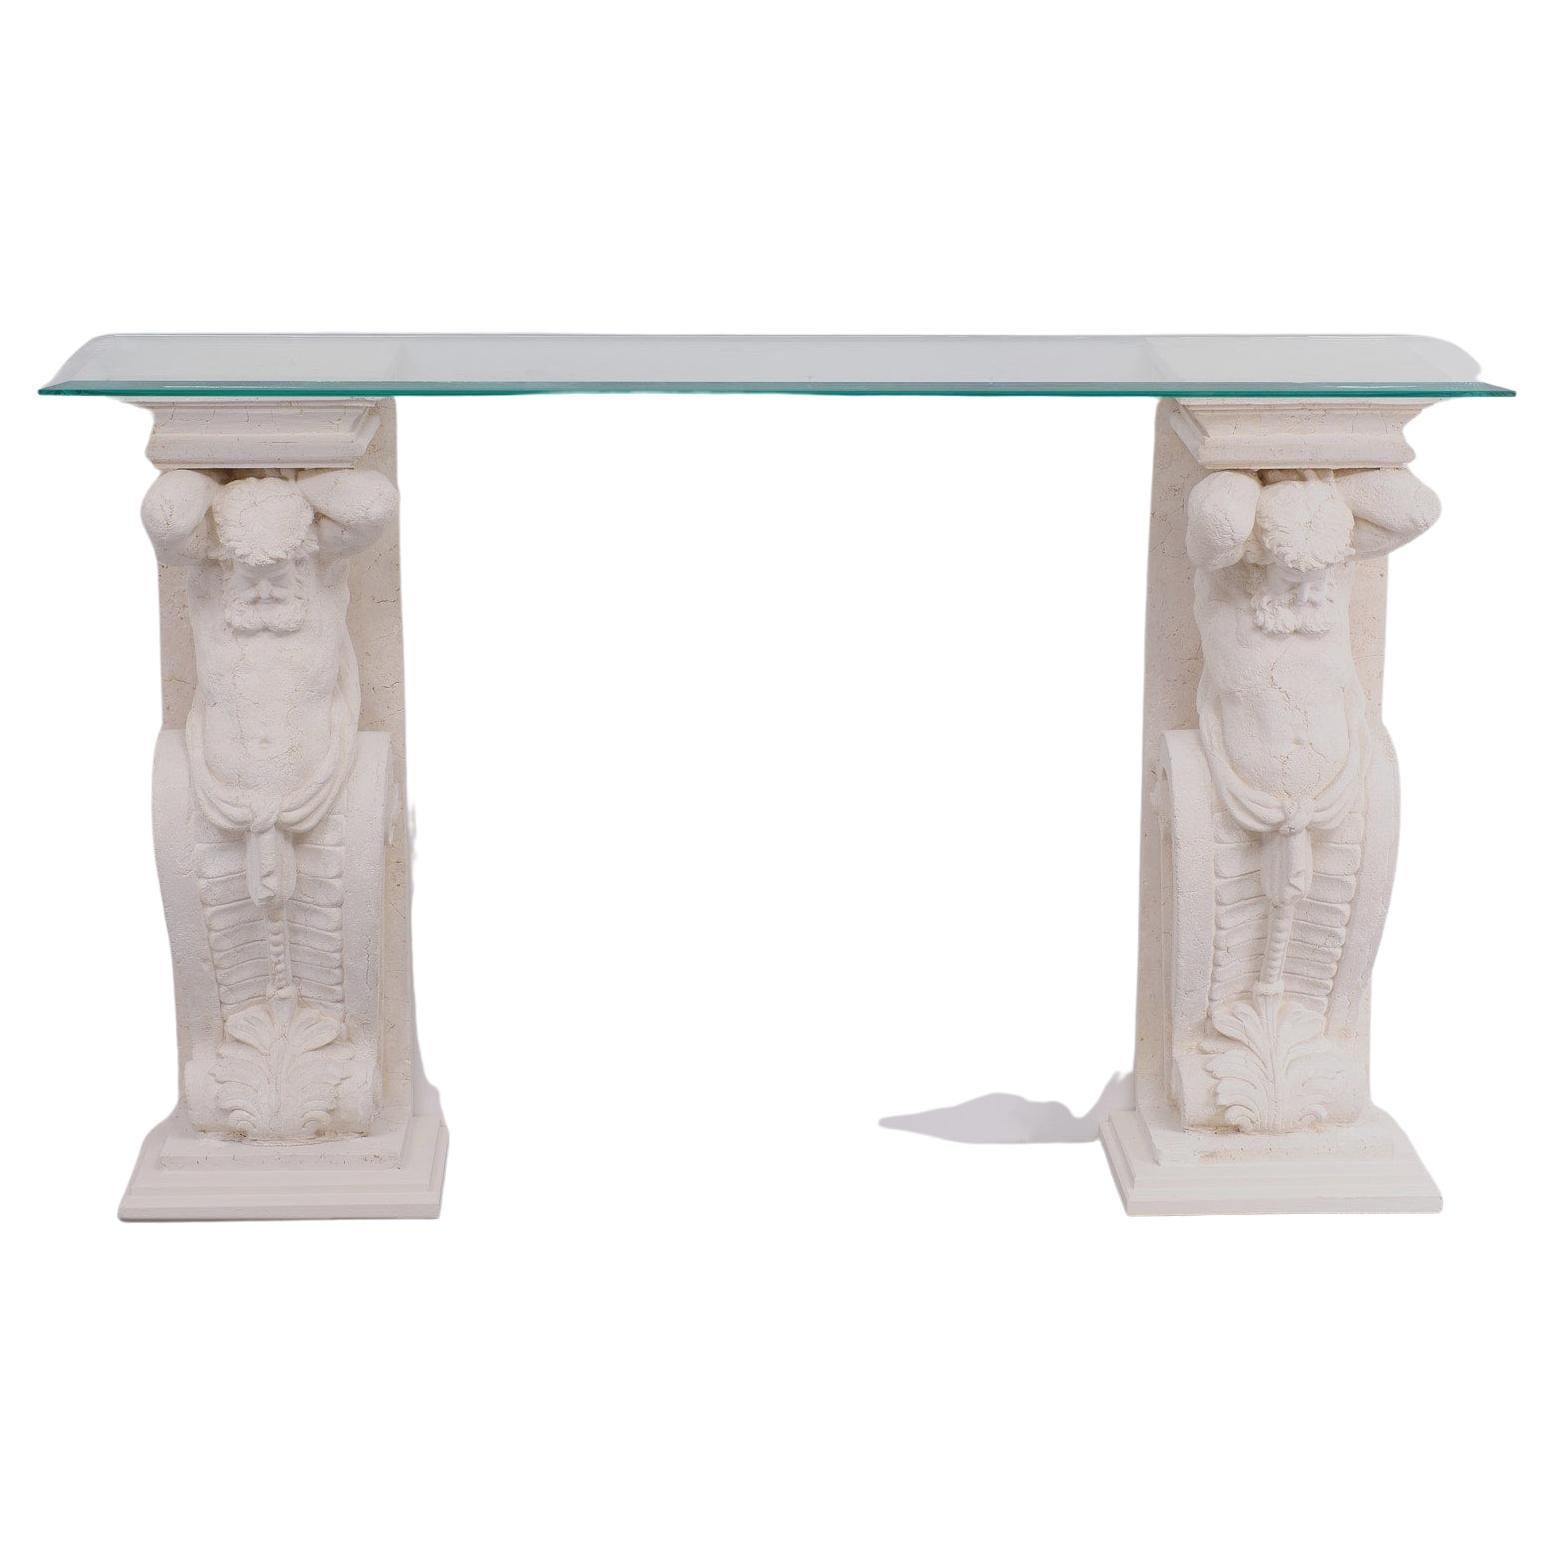 Two unique Cast Stone console tables, mythologies Greek manly figures carry en,
a beveled Glass top, so very decorative.